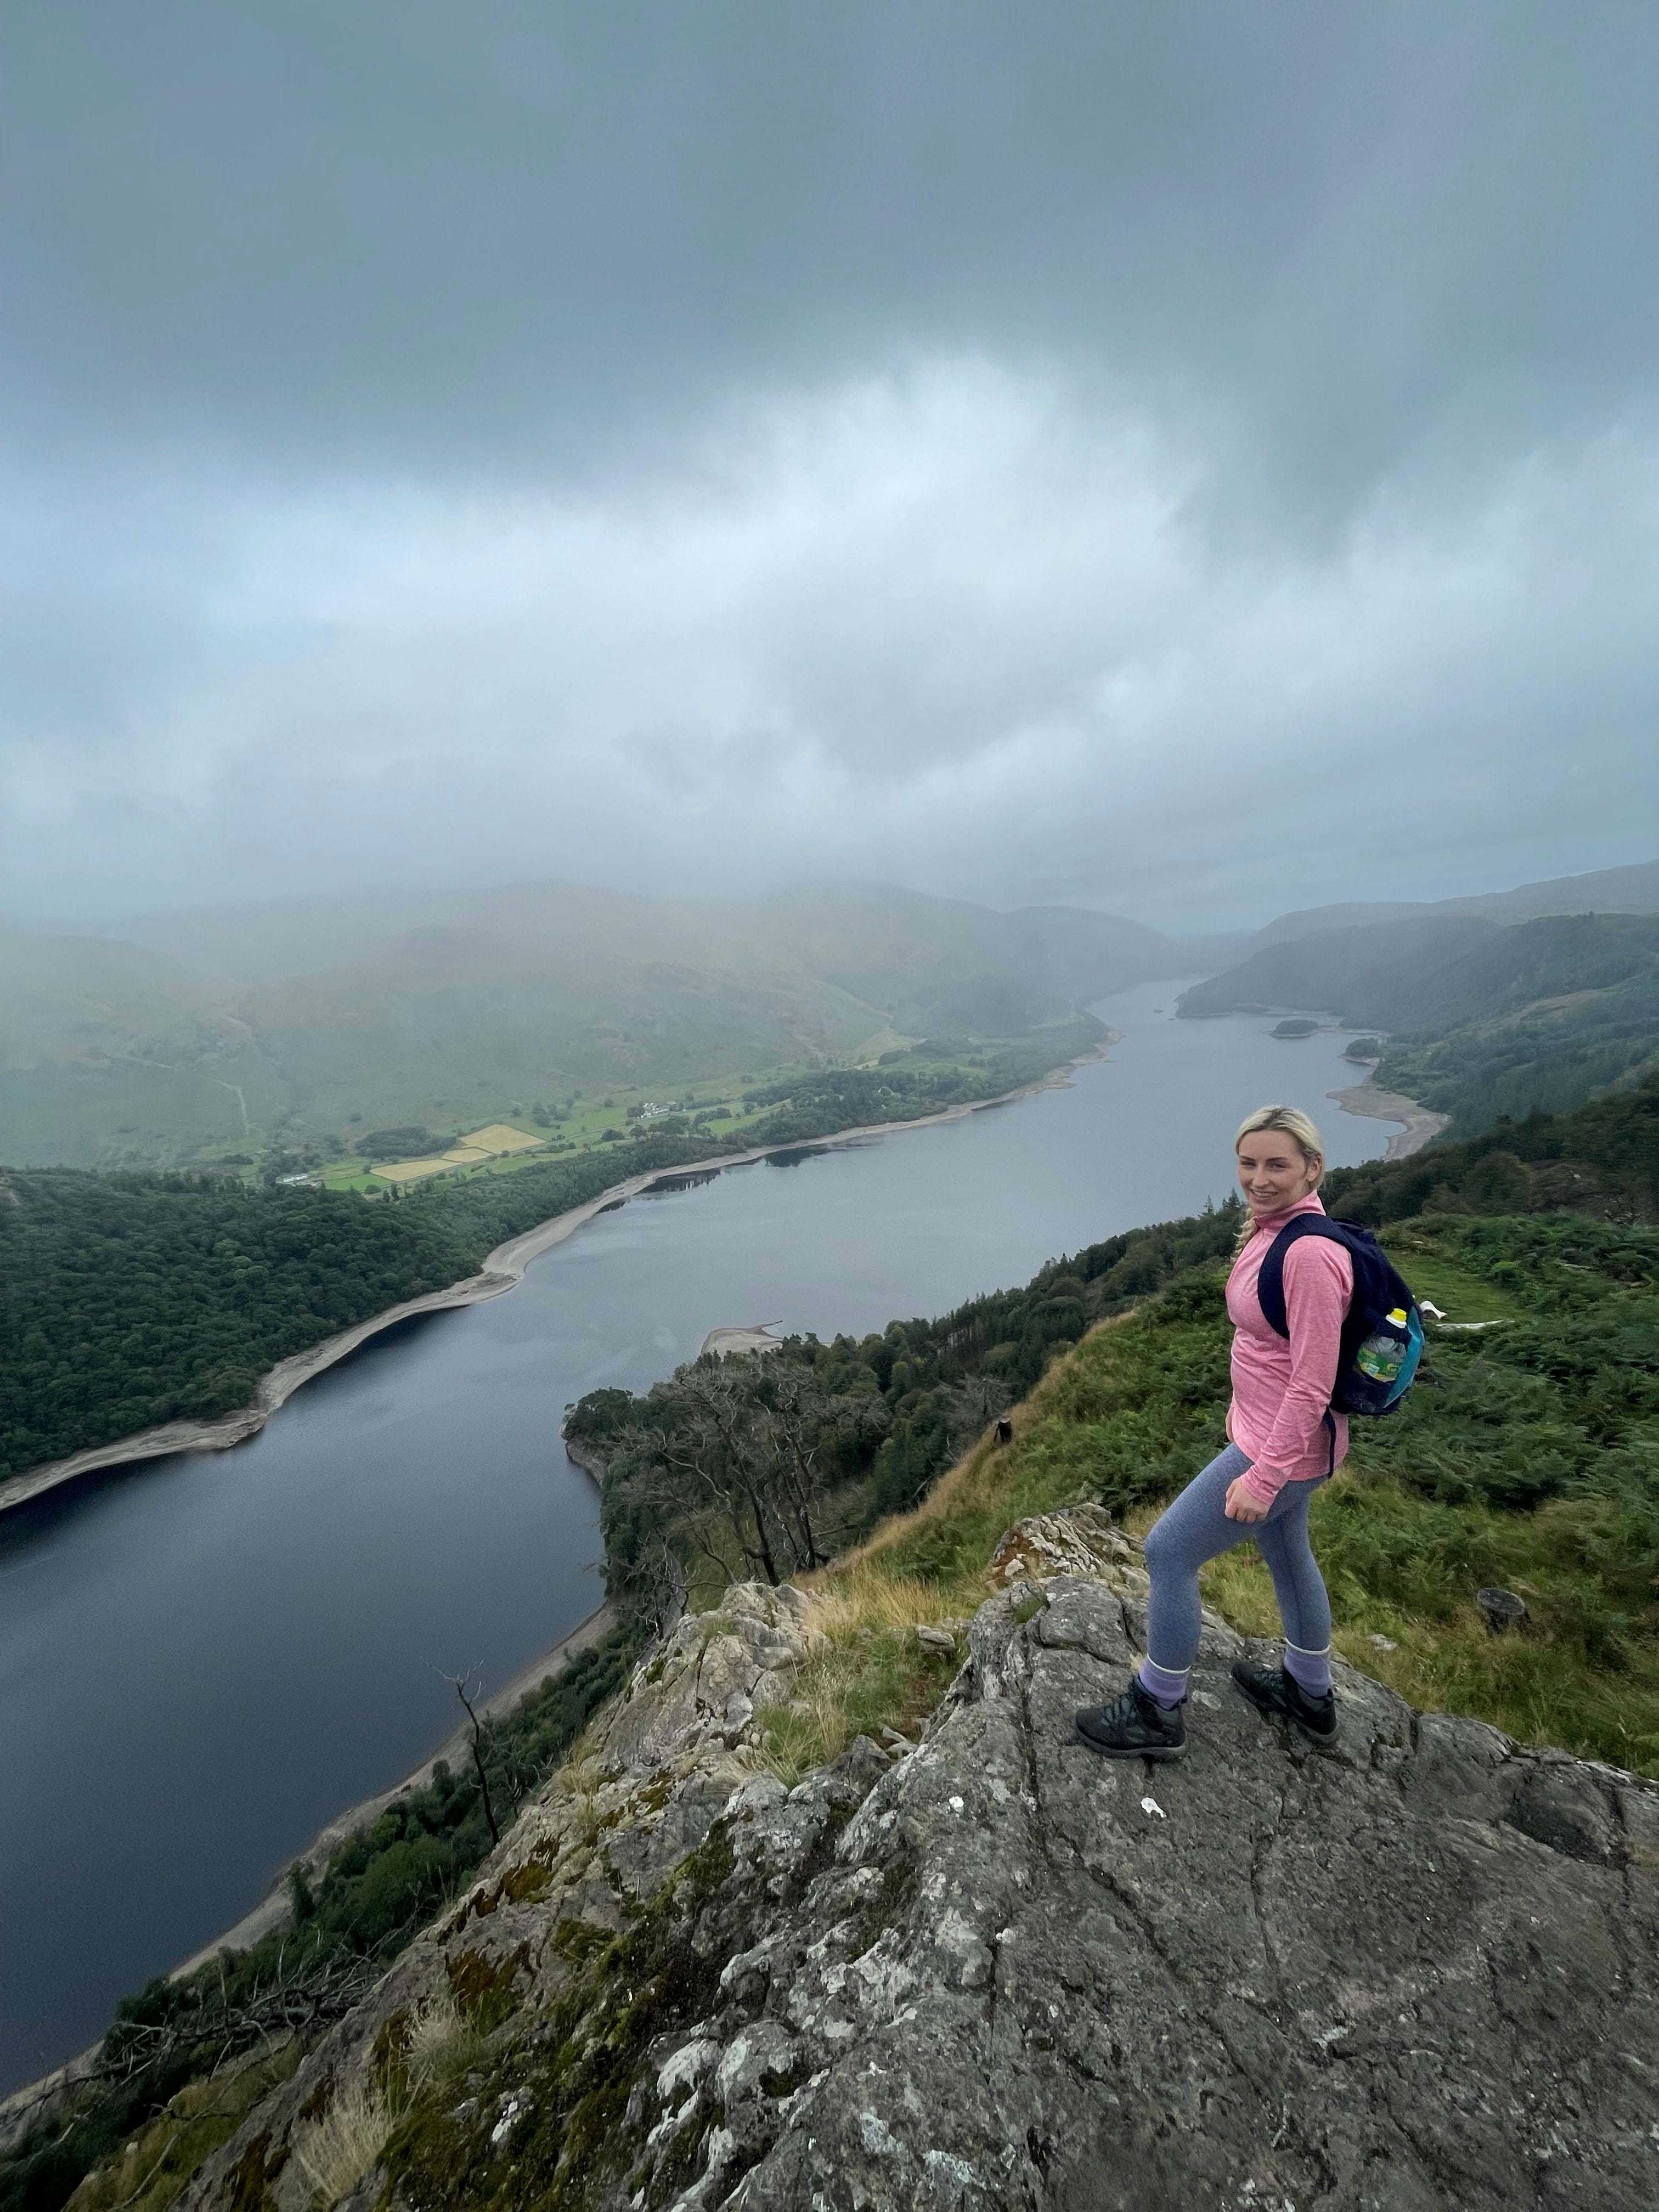 Beth Liddle, who completed 12 of the Lake District’s Wainwrights